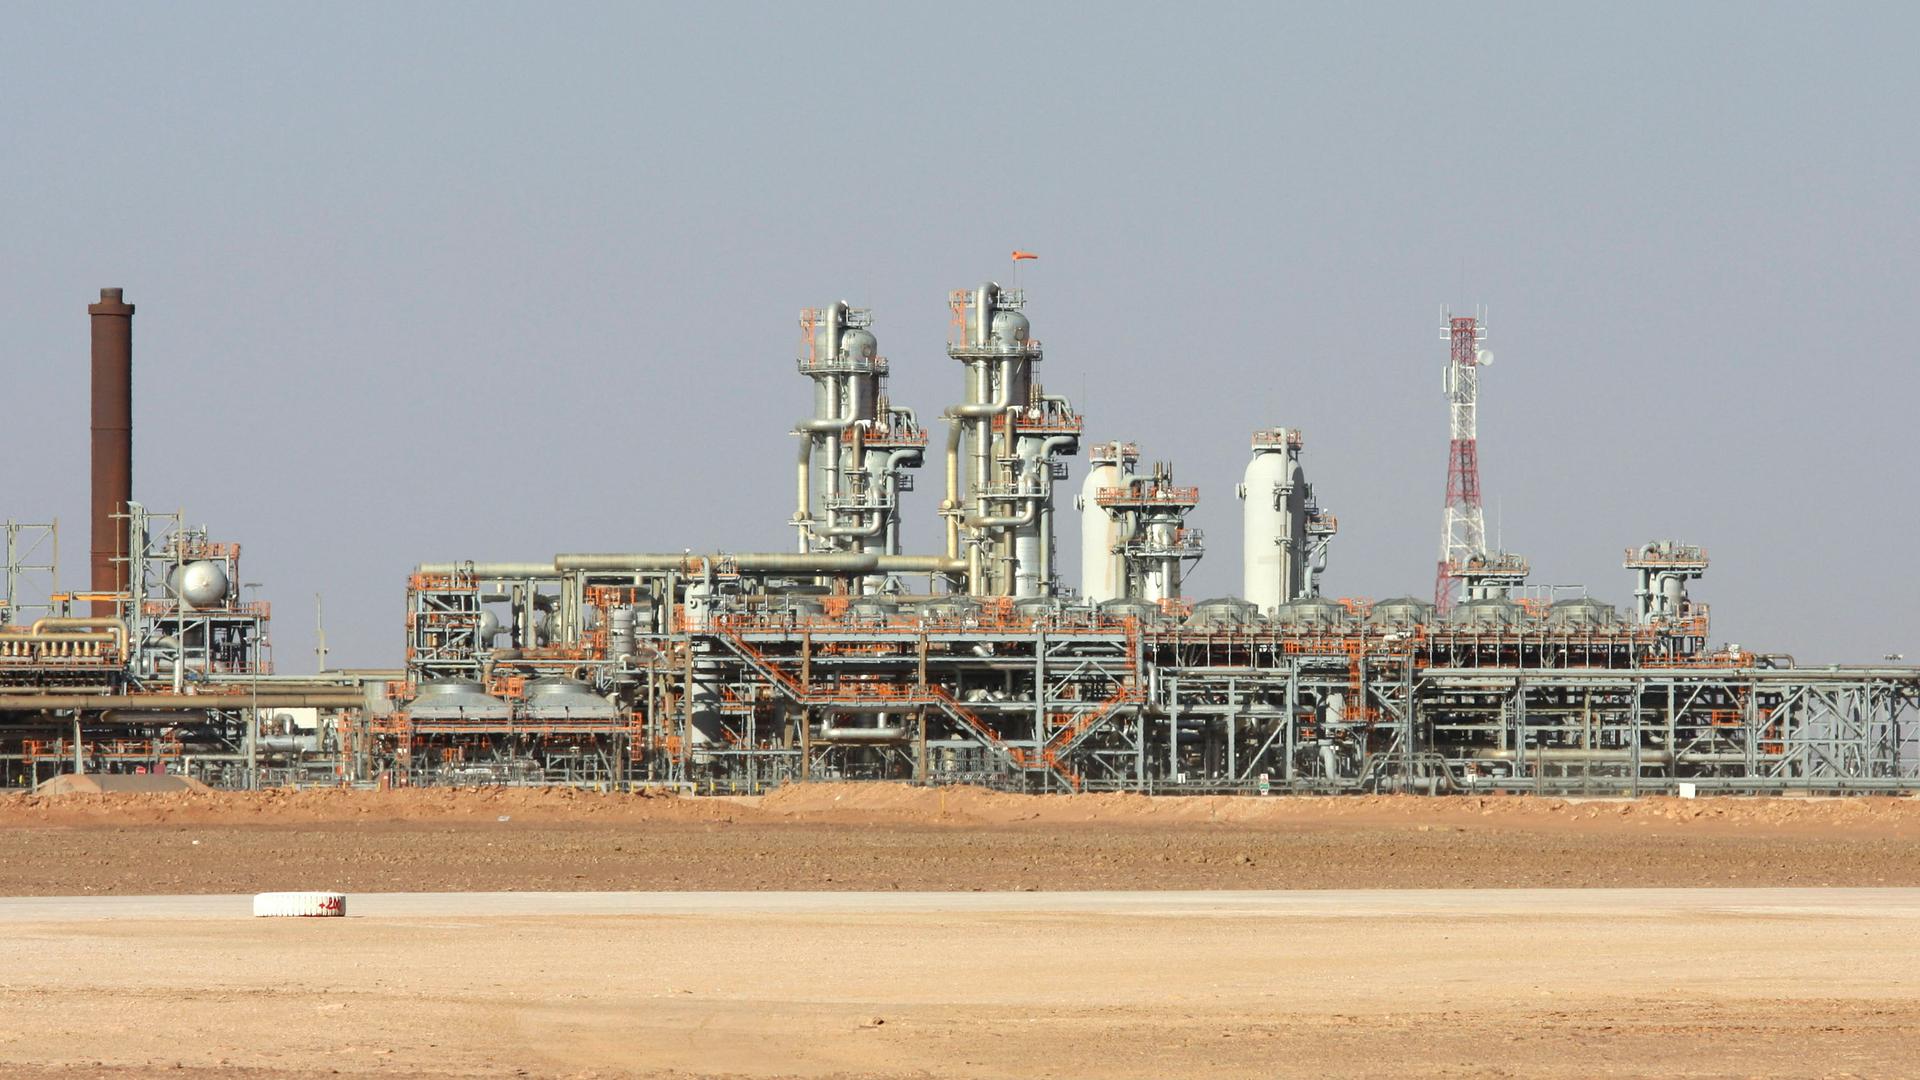 The Krechba gas plant in Algeria's Sahara Desert, about 720 miles south of the capital, Algiers, Dec. 14, 2008.